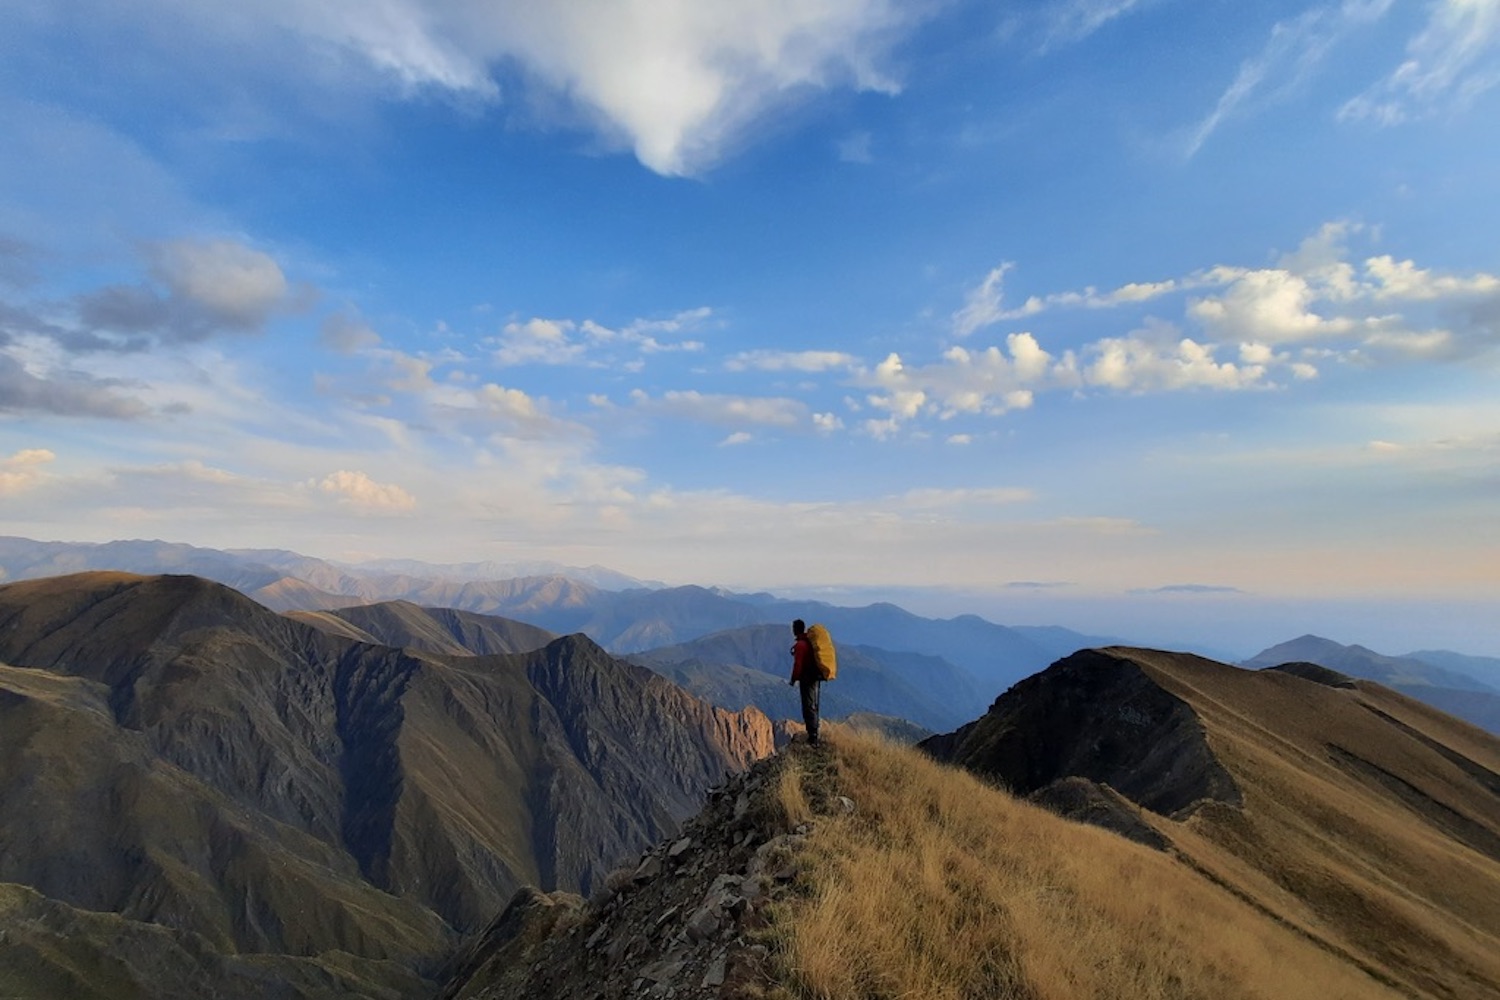 A hiker pauses along a trail in Azerbaijan. Image courtesy of the Transcaucasian Trail Association